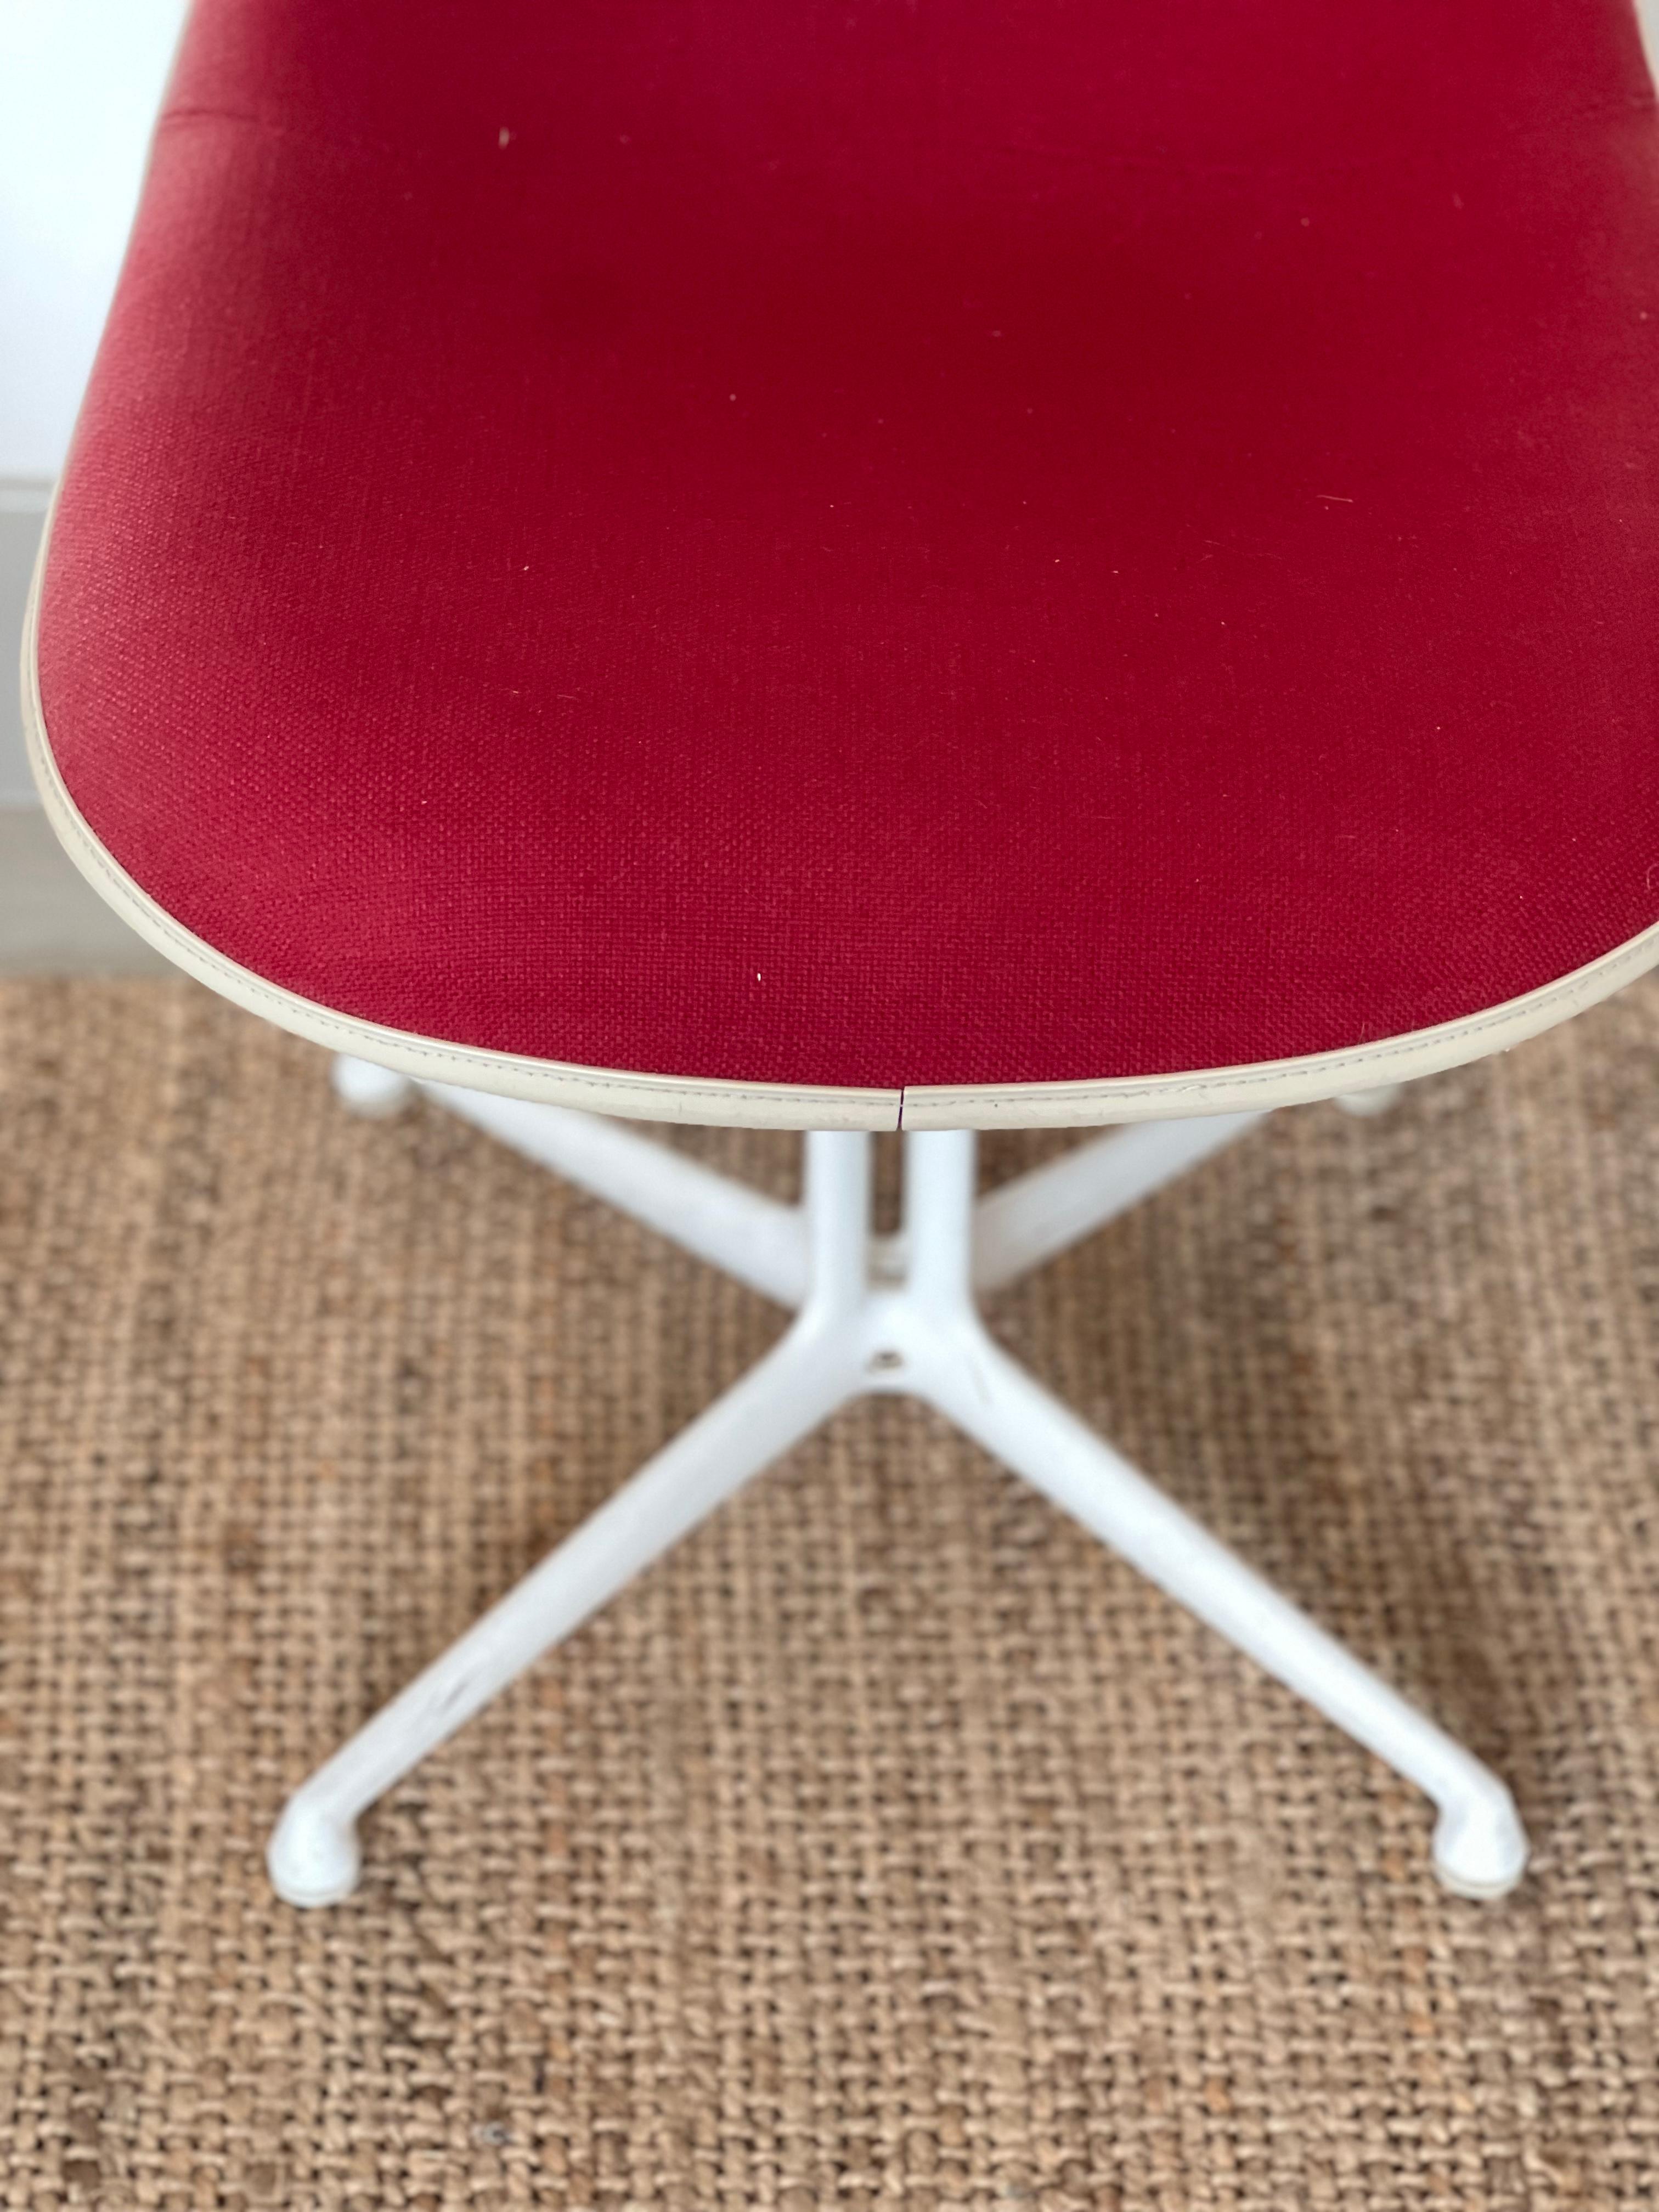 Fibreglass La Fonda Chair by Charles & Ray Eames for Vitra, 1960s For Sale 3